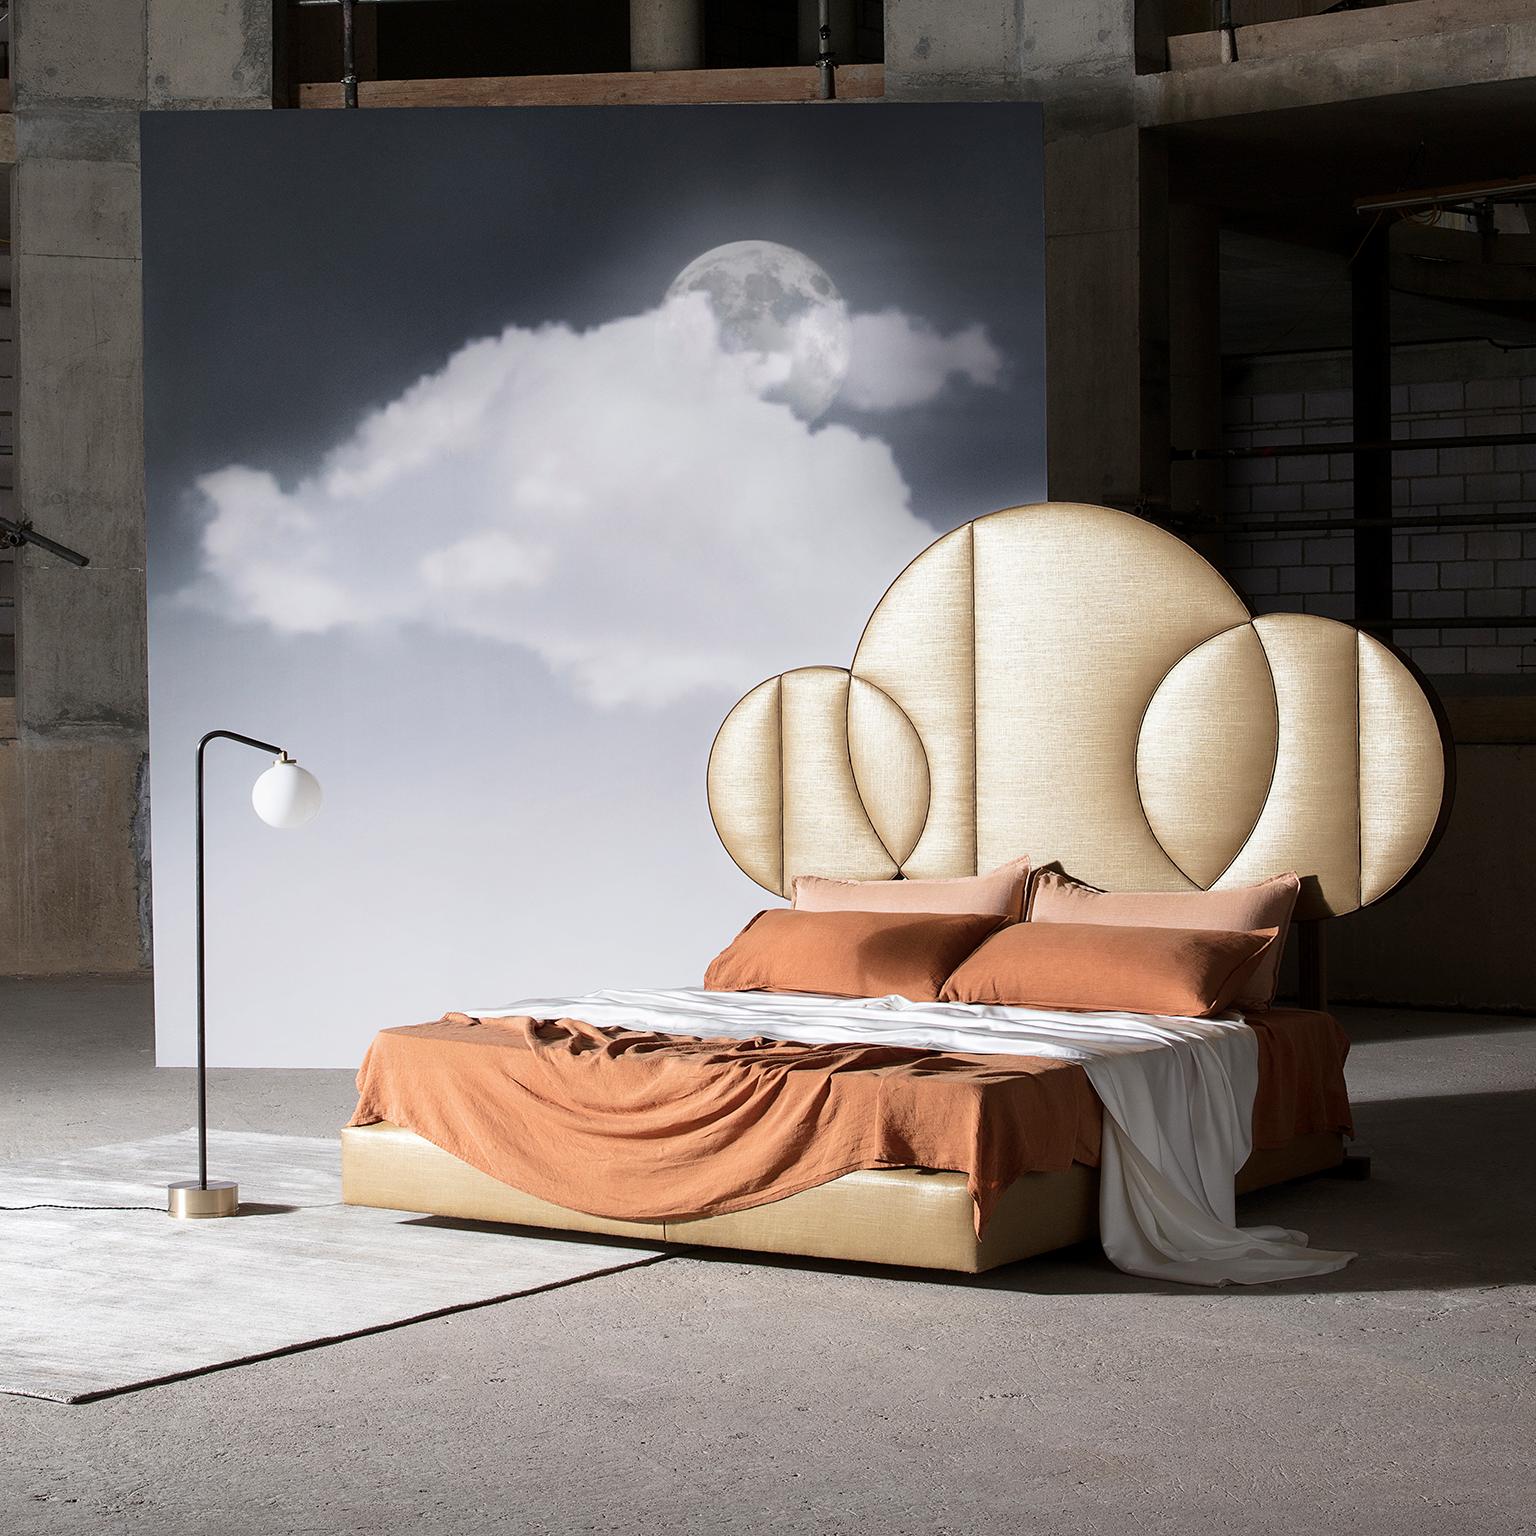 Developed in conjunction with Korean lifestyle designer, Teo Yang, the Savoir Moon bed is truly one-of-a-kind. In East Asian folklore, the moon is thought to represent a symbol of luck and wealth. Teo’s design captures the movement of the moon, with